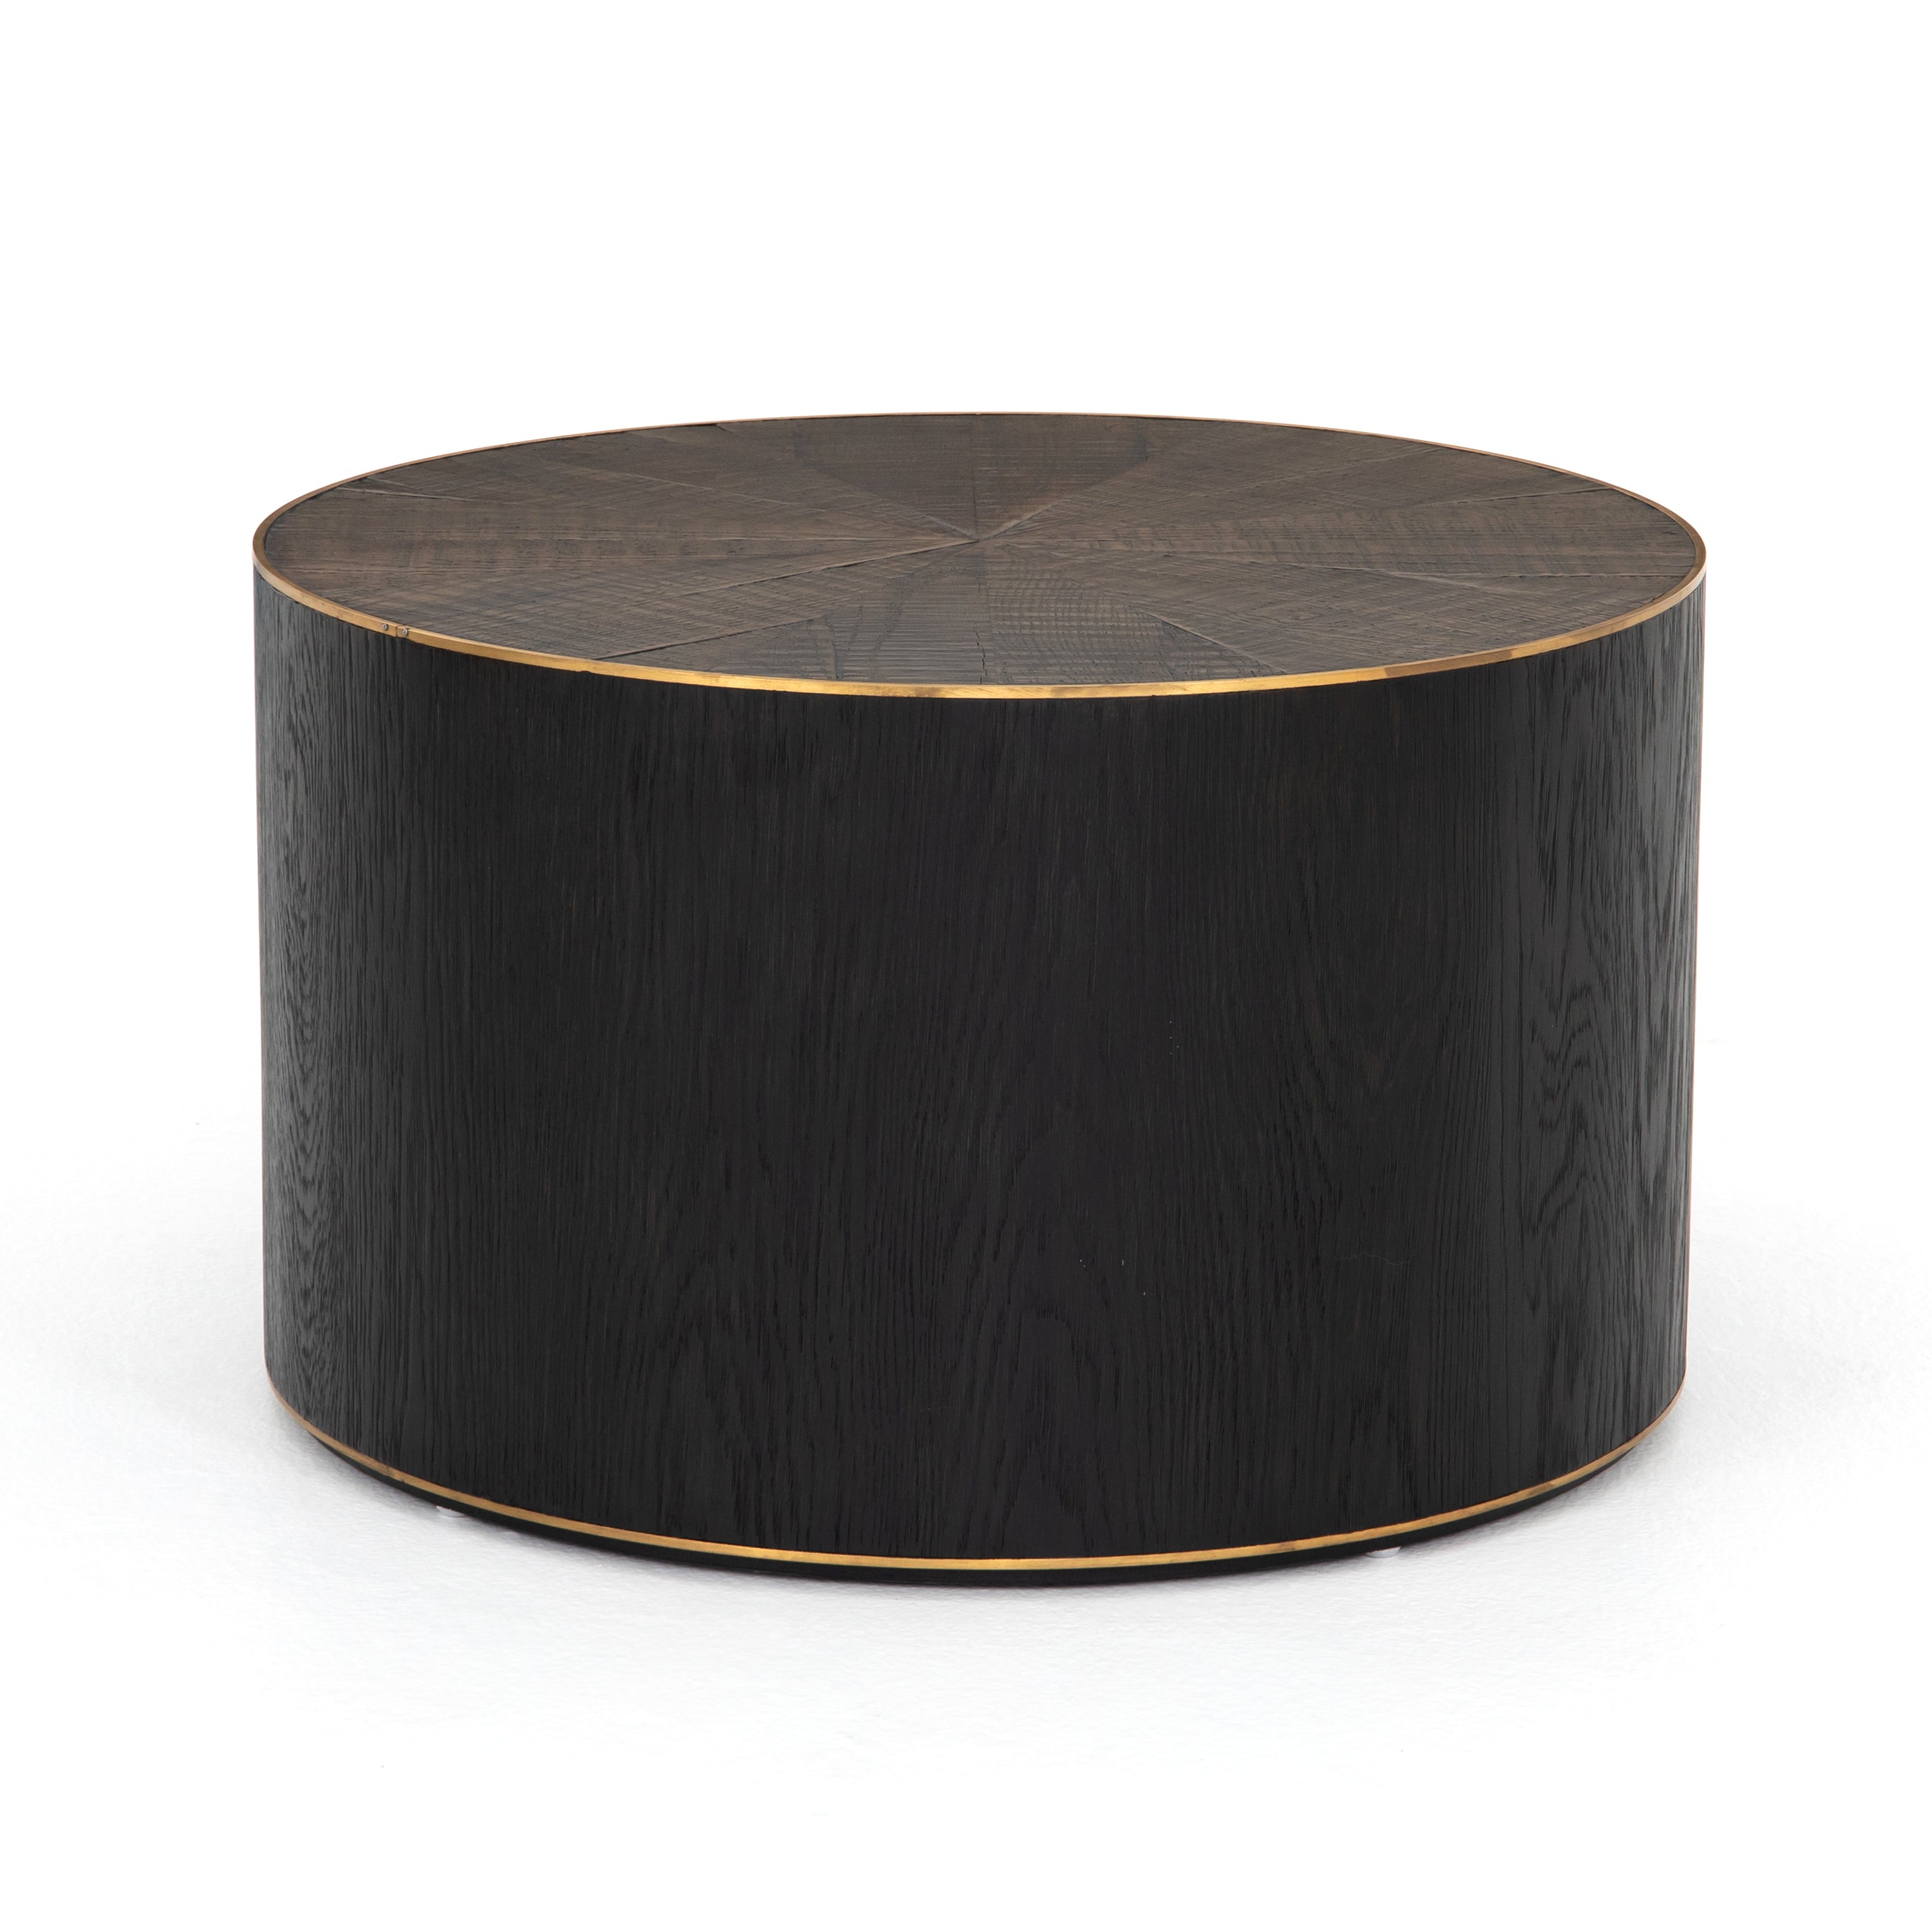 Bring on the drama. An ebony-finished oak top is cut in a starburst texture, framed by deep ebony sides, and encircled by bright brass-clad binding. Amethyst Home provides interior design, new construction, custom furniture, and area rugs in the Washington metro area.